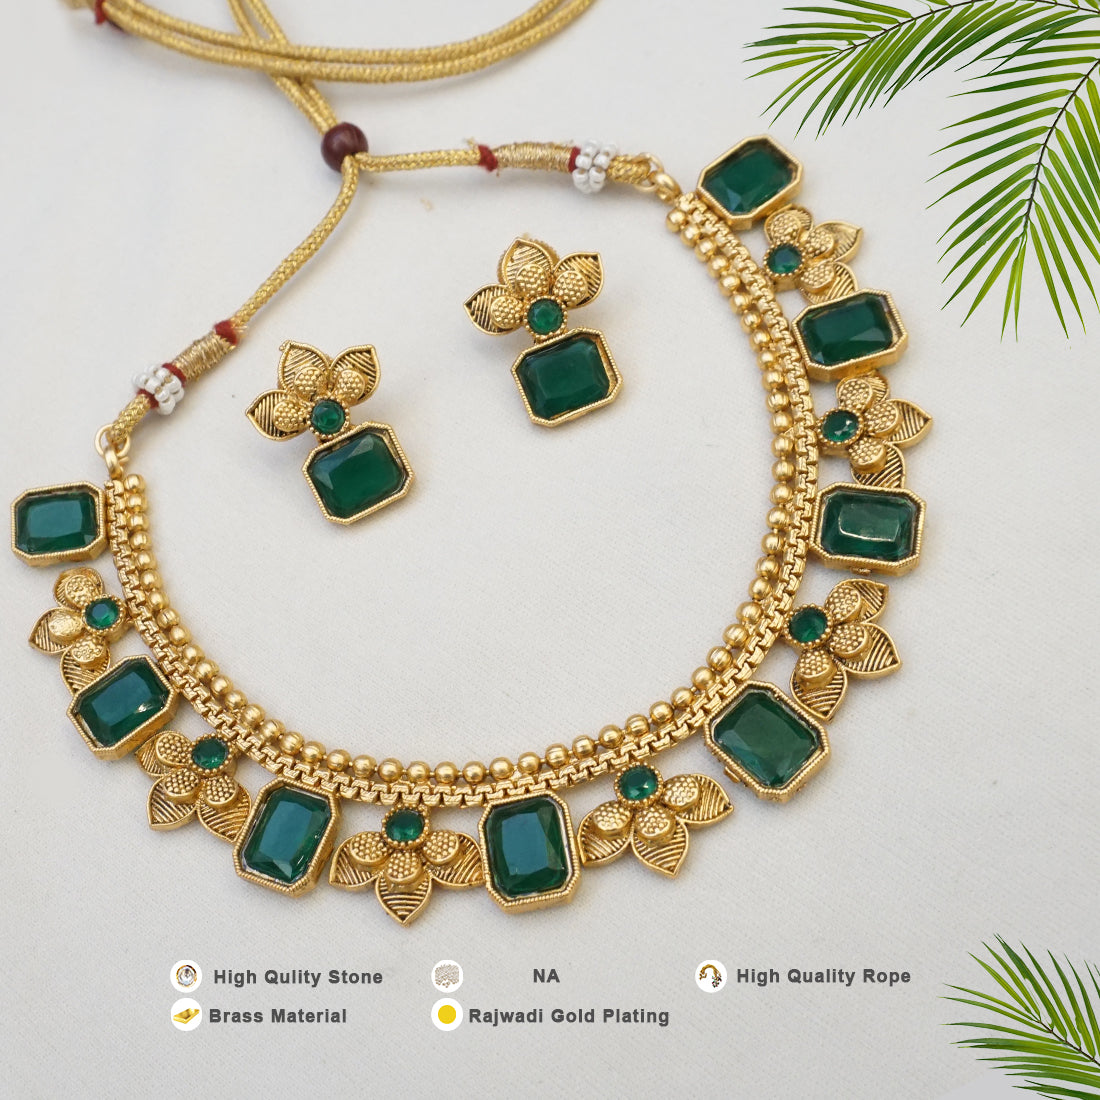 Rajwadi Gold Plated Short Necklace Set with Earring